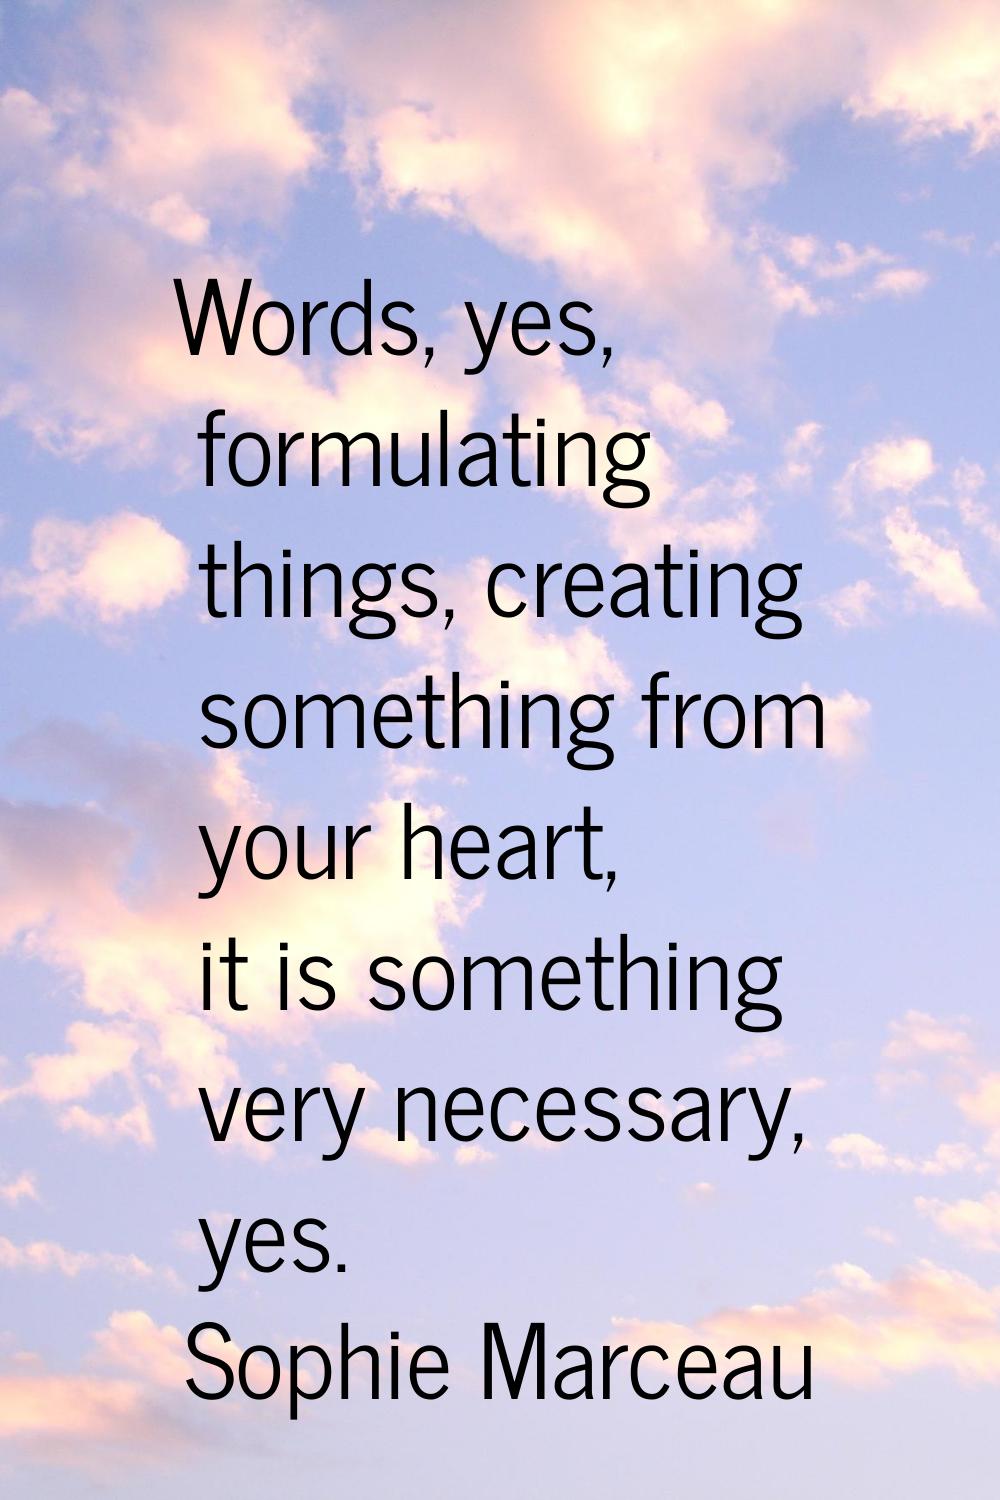 Words, yes, formulating things, creating something from your heart, it is something very necessary,